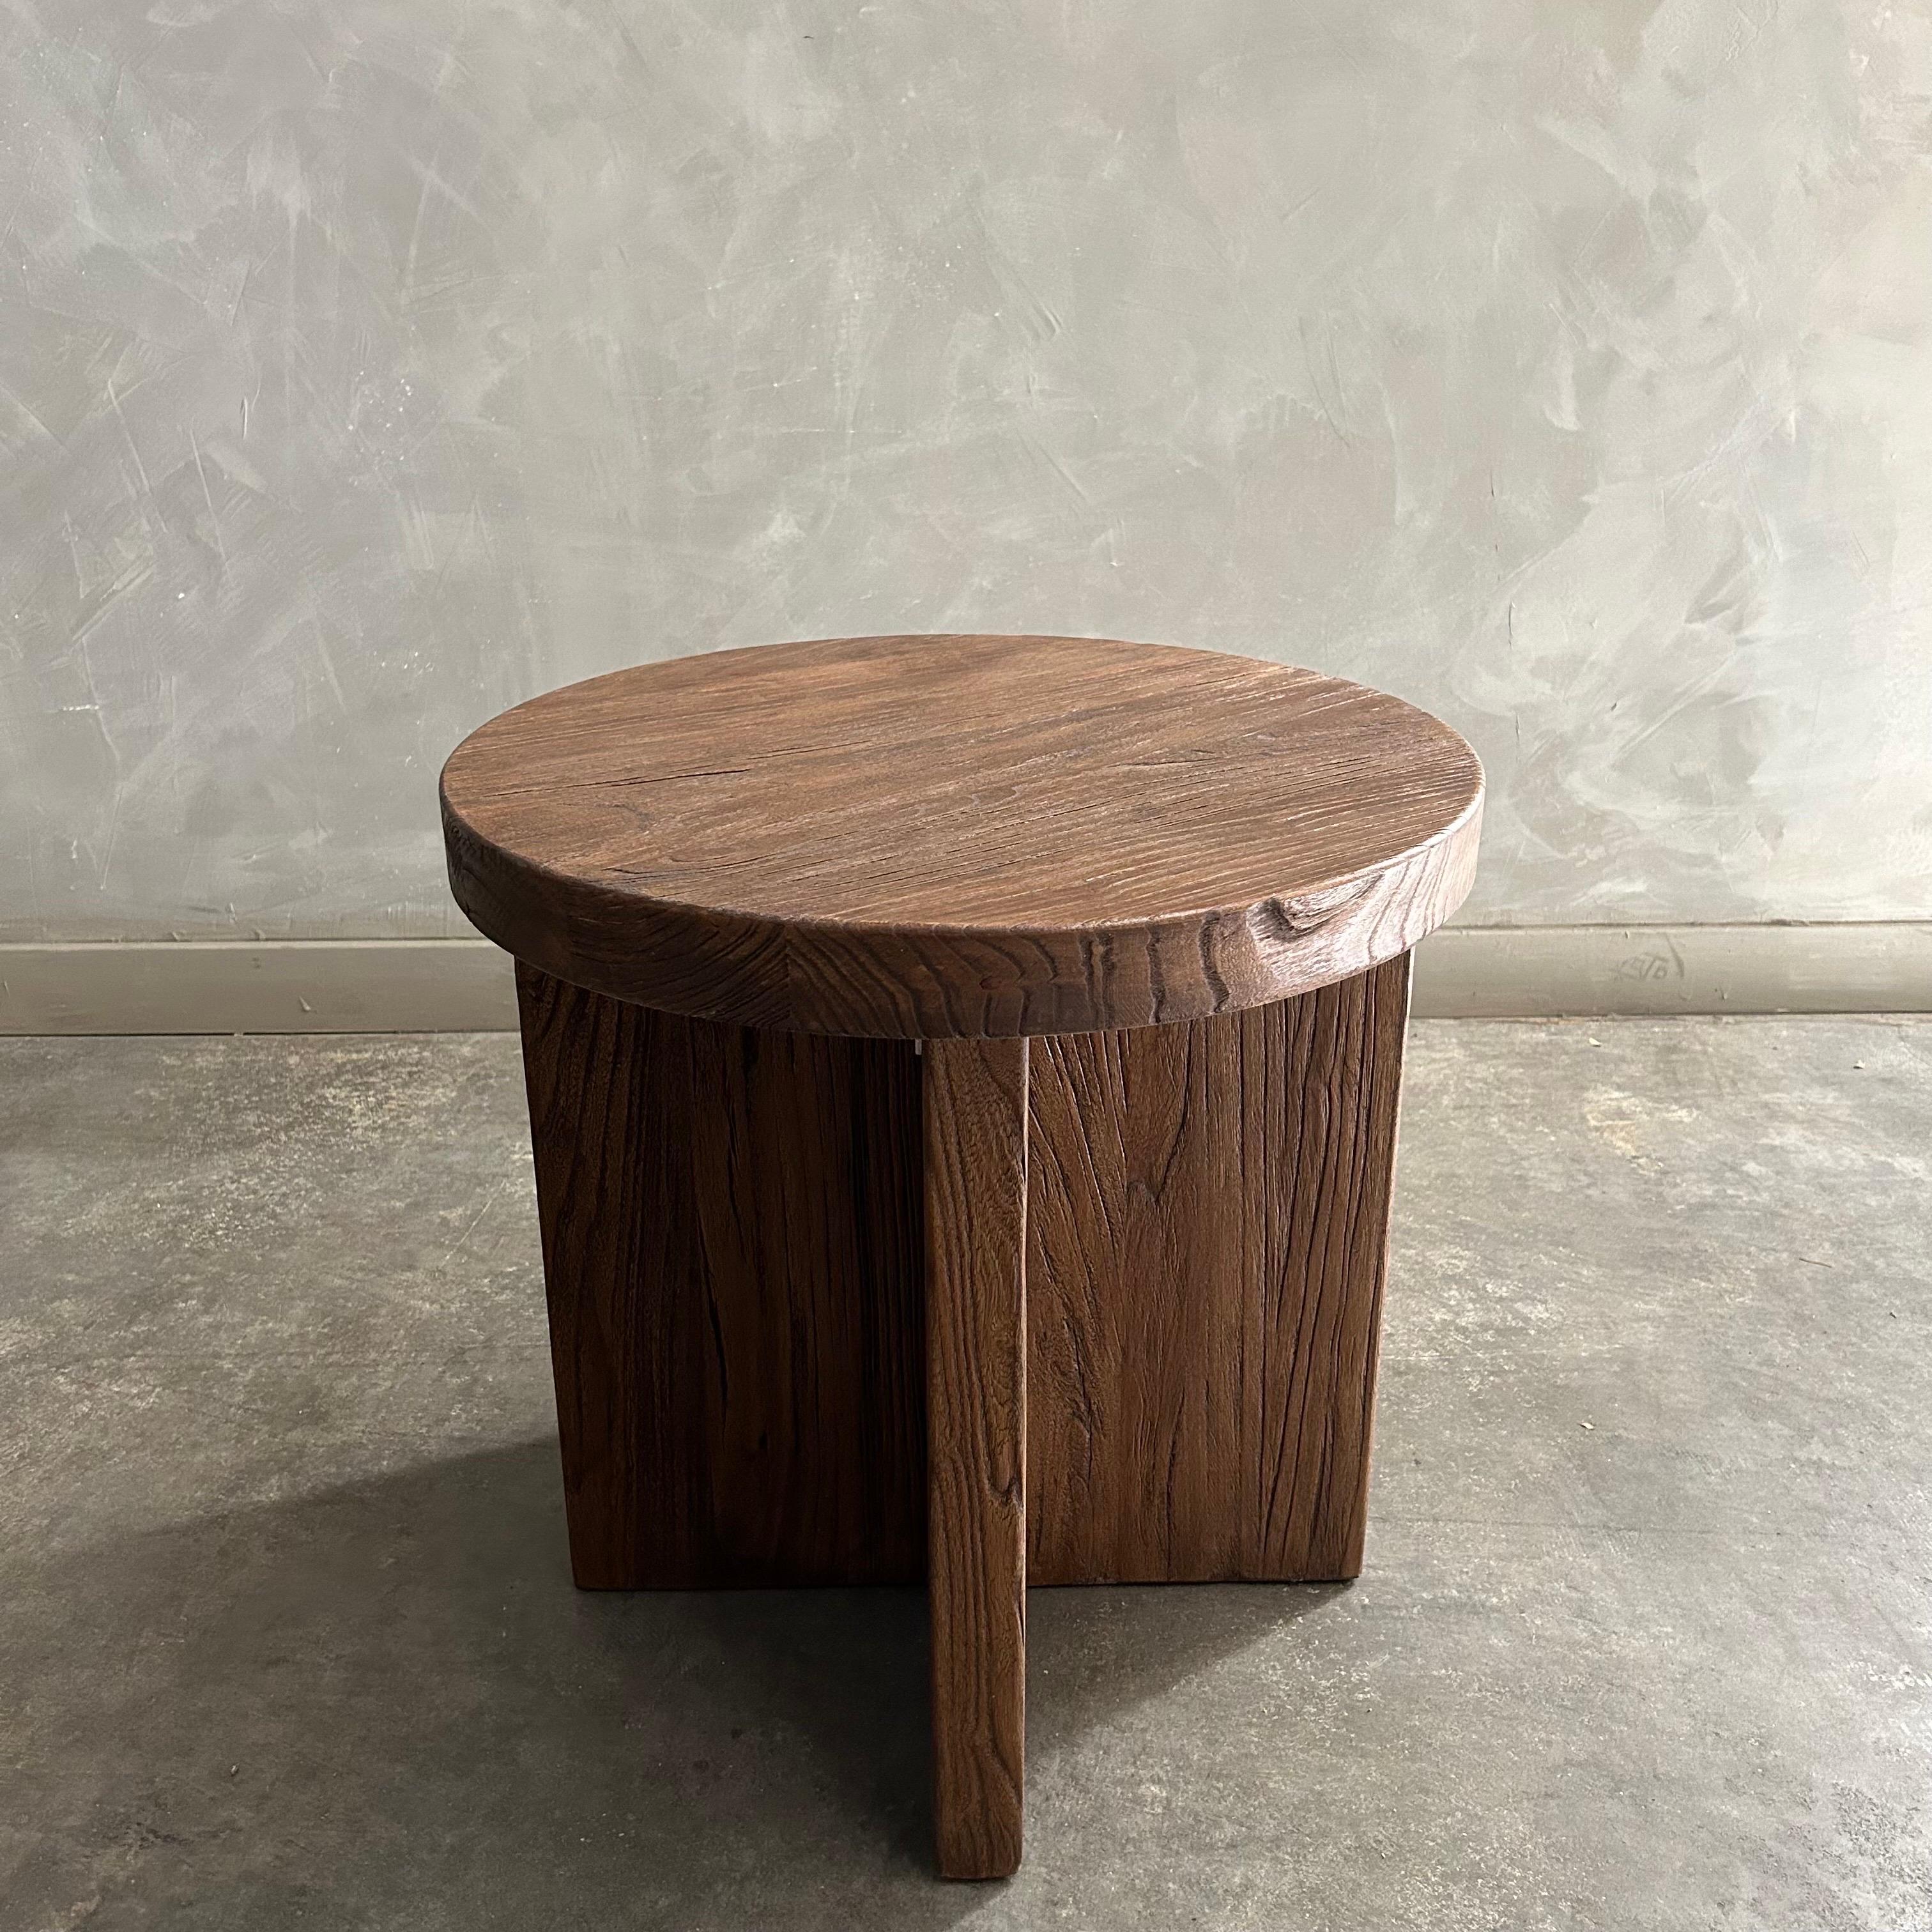 BH Collection
Cadence Side Table in Walnut Finish
The artisanal construction methods highlight the elm woods beautiful grain pattern & knots and fissures from its past life. The most authentic materials are hand selected, and hours of